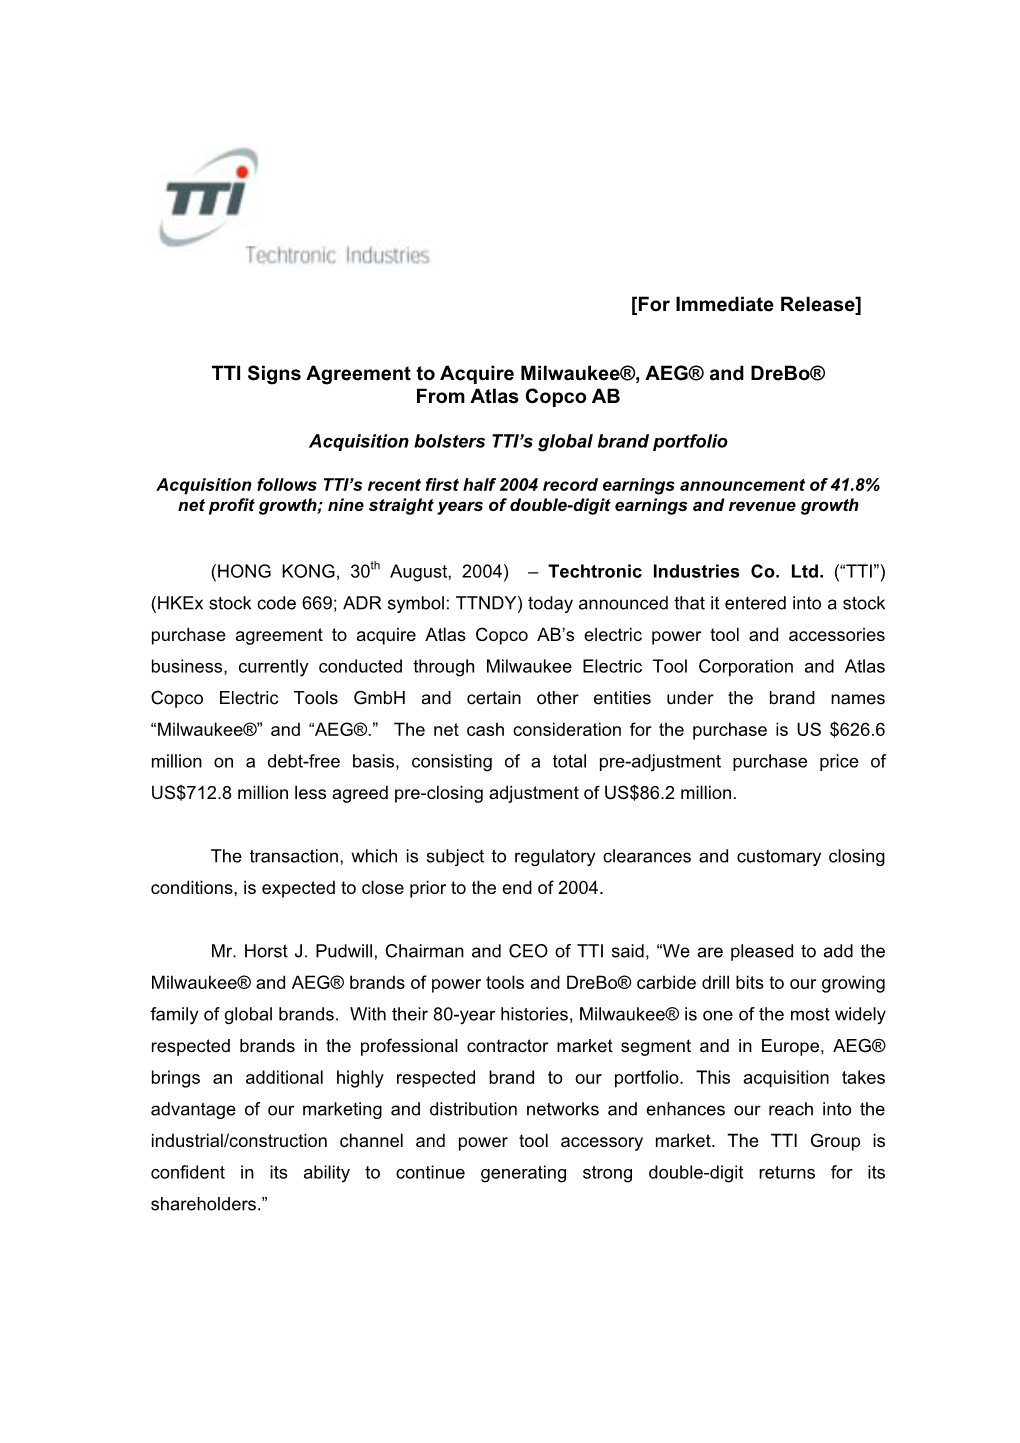 TTI Signs Agreement to Acquire Milwaukee®, AEG® and Drebo® from Atlas Copco AB